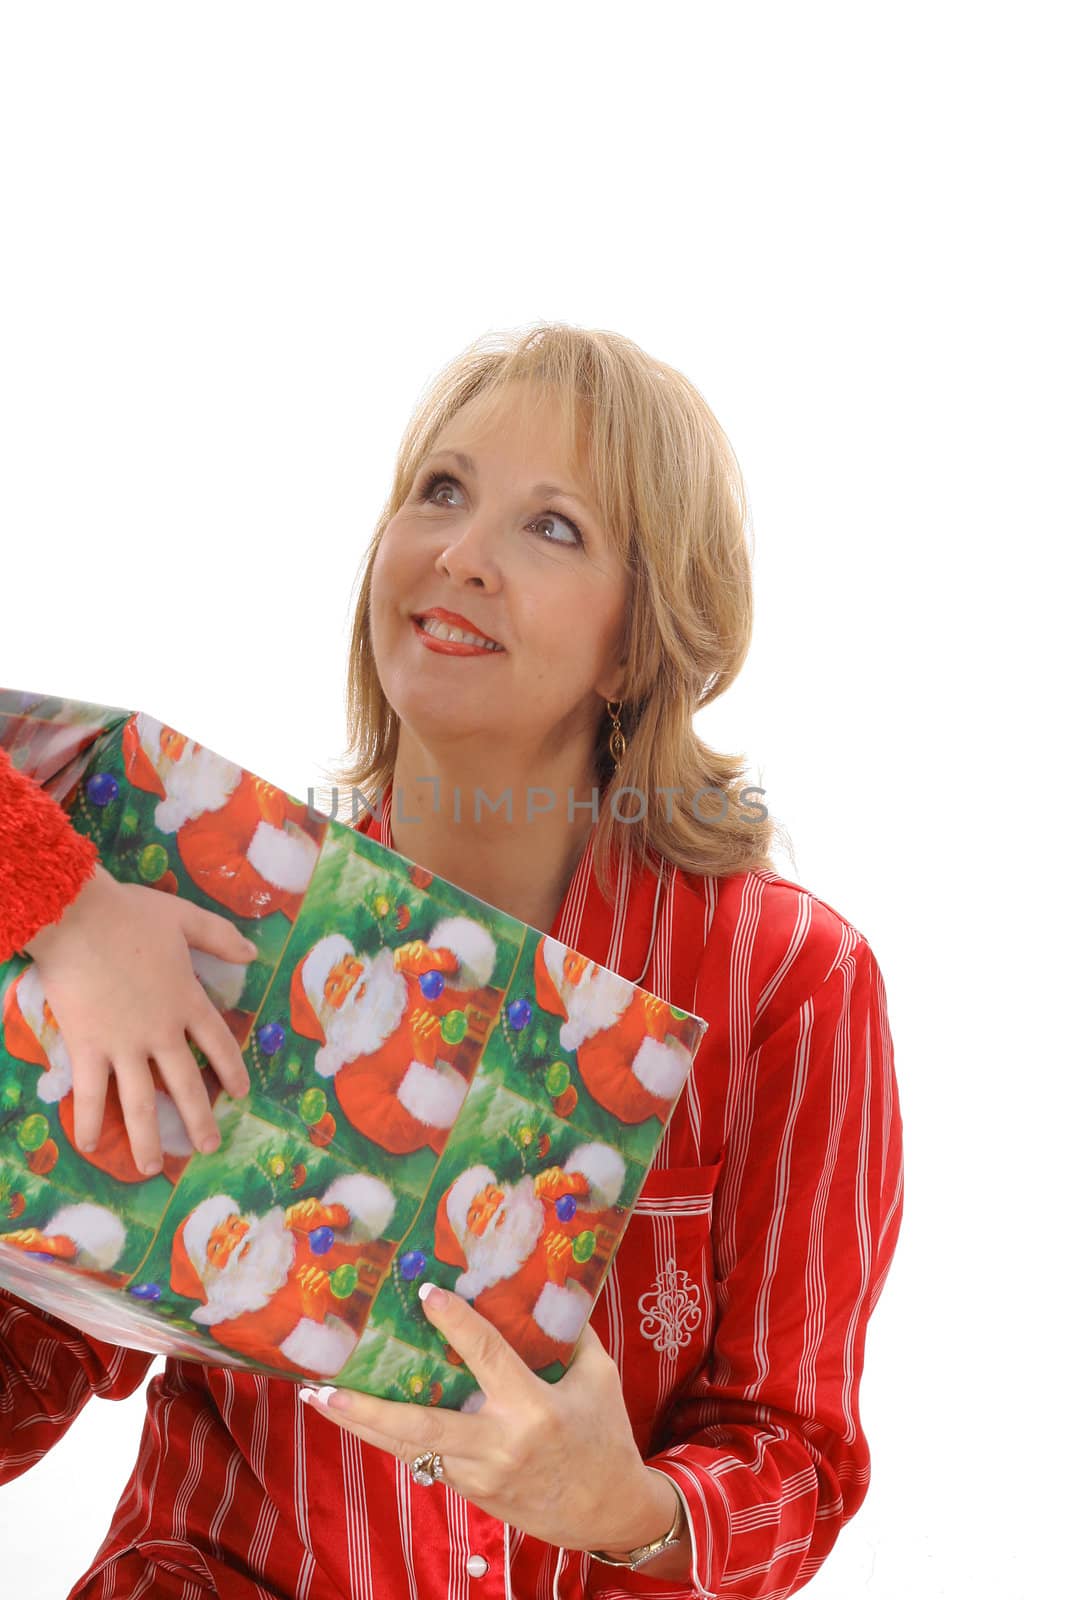 Grandmother getting a present